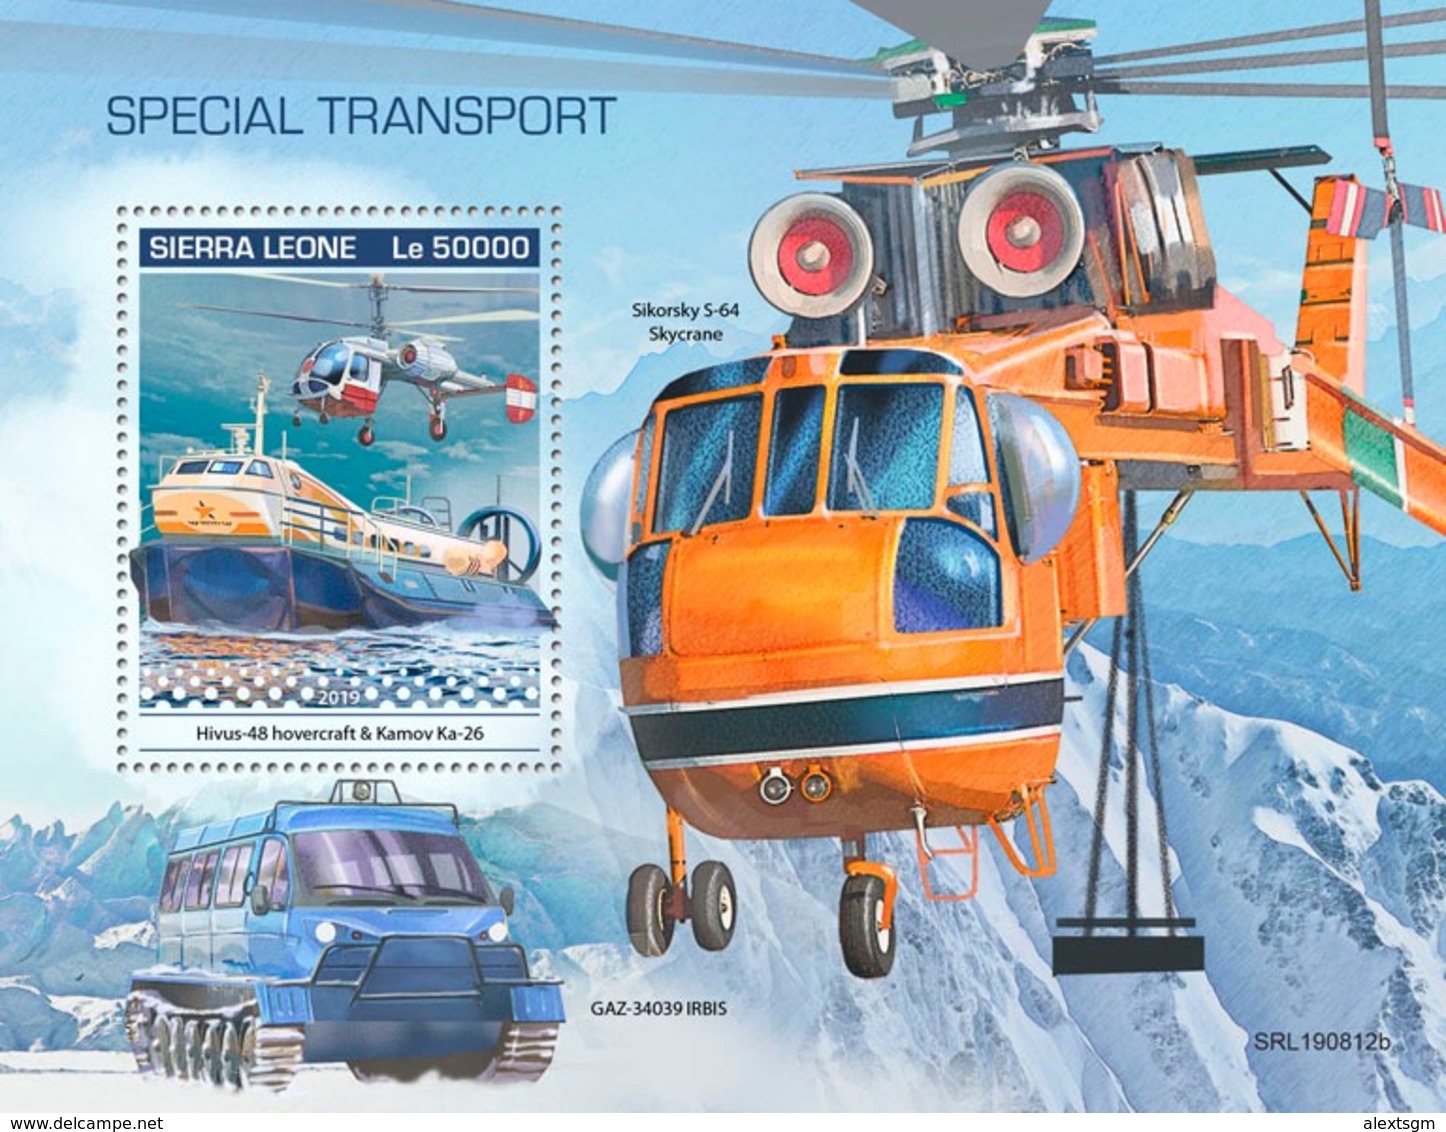 SIERRA LEONE 2019 - Hovercraft, Special Transport. S/S. Official Issue - Ships